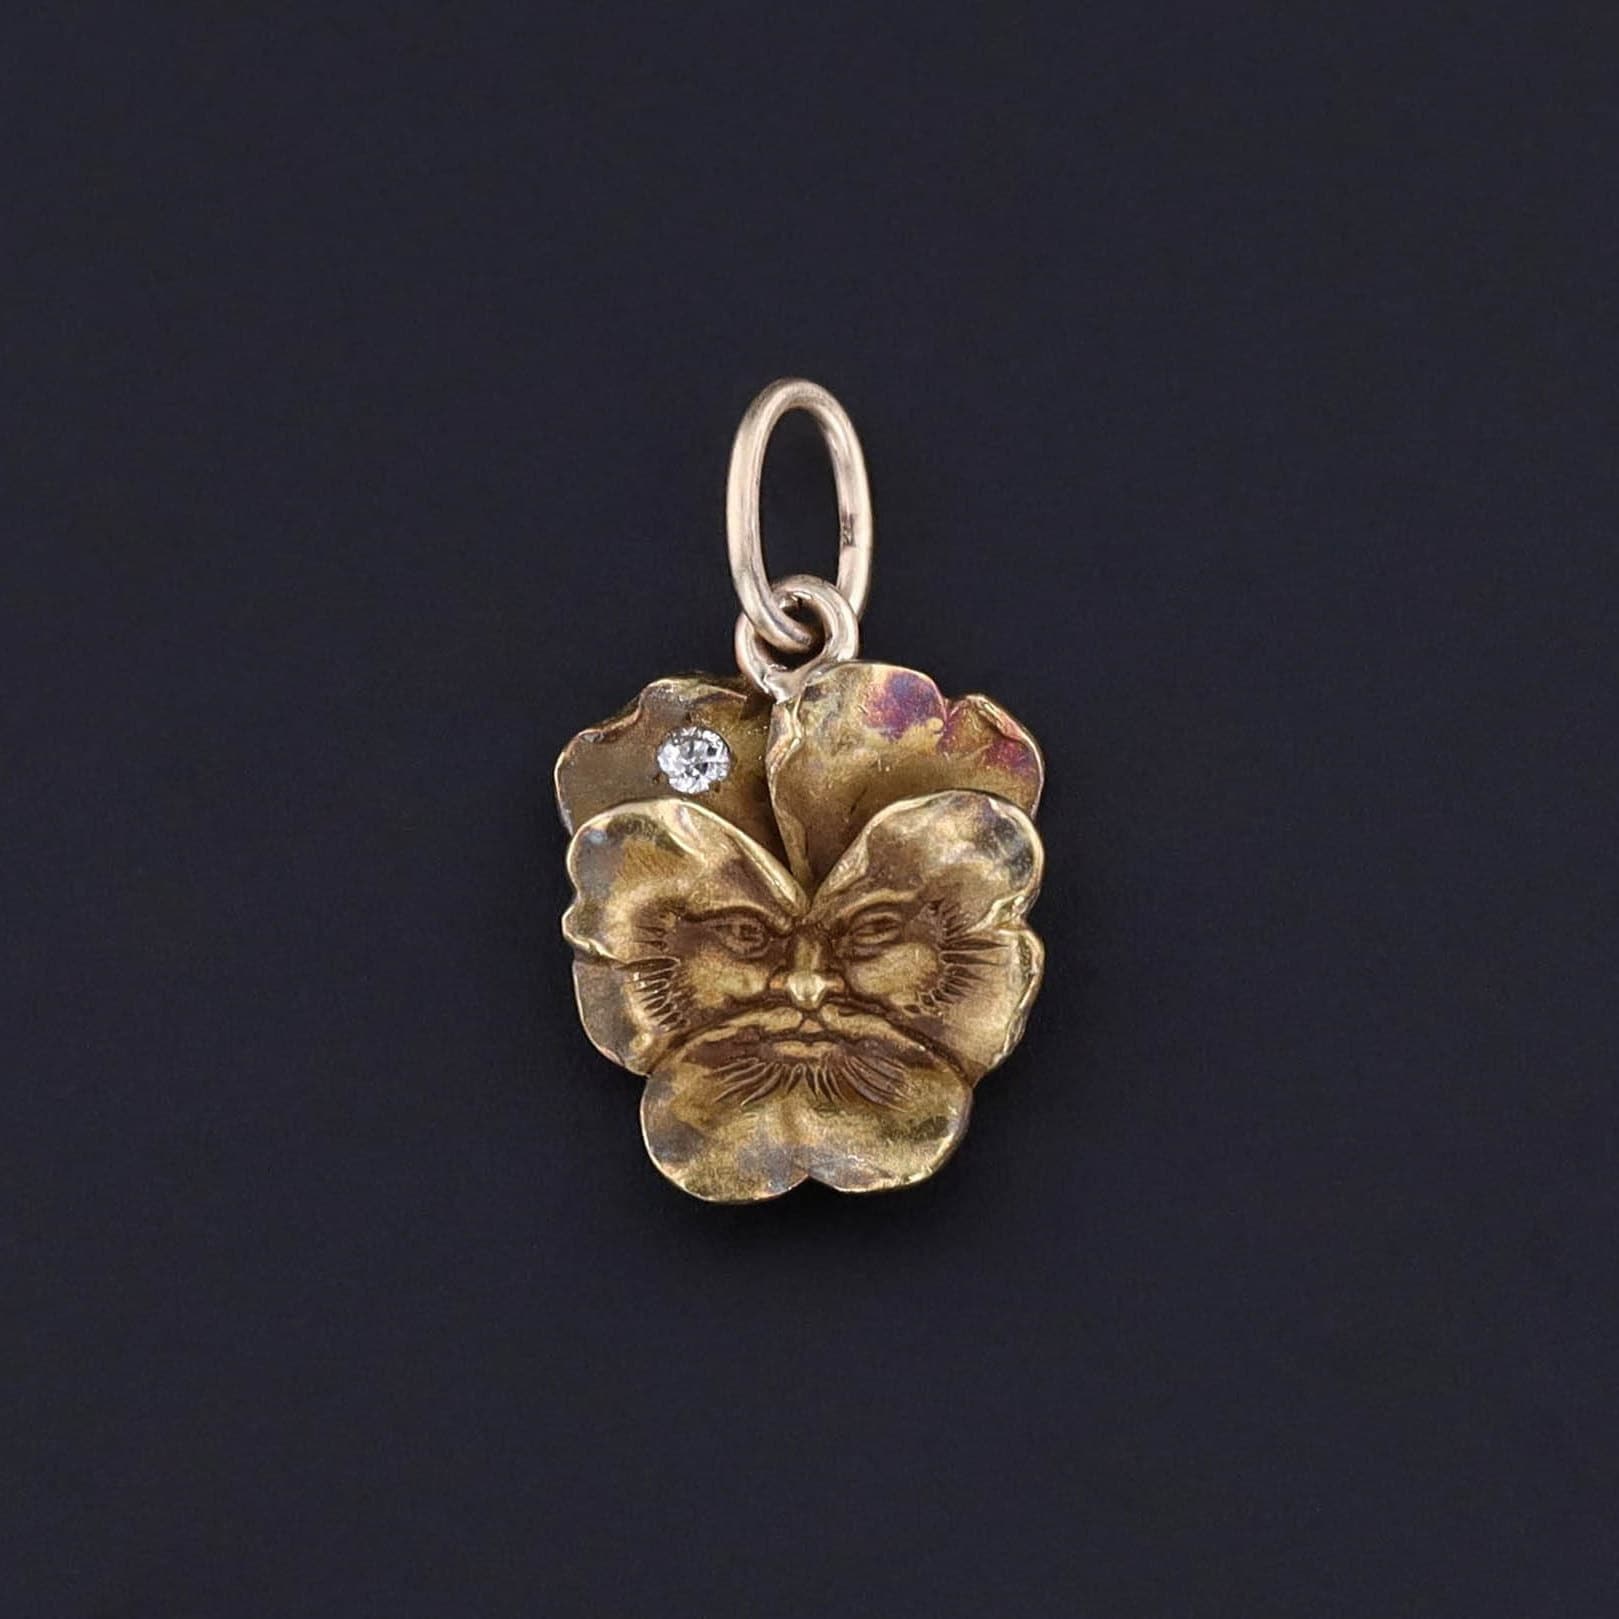 Antique Pansy Man Charm of 14k Gold